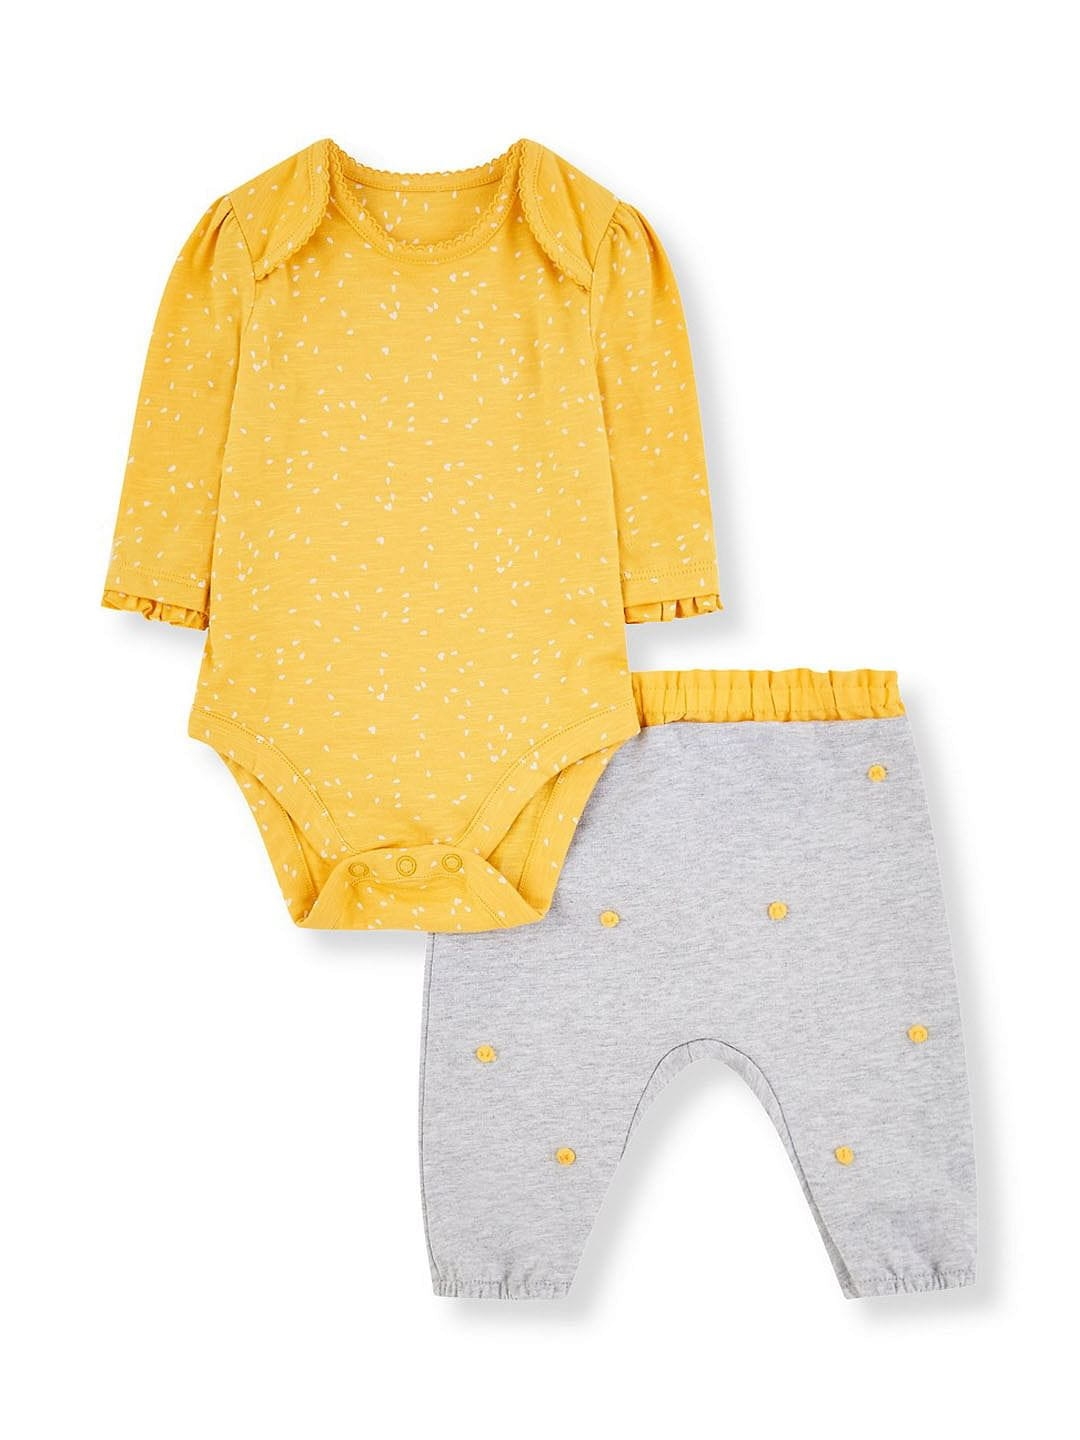 Mothercare | Yellow Bodysuit and Grey Pom Pom Trousers Set 0